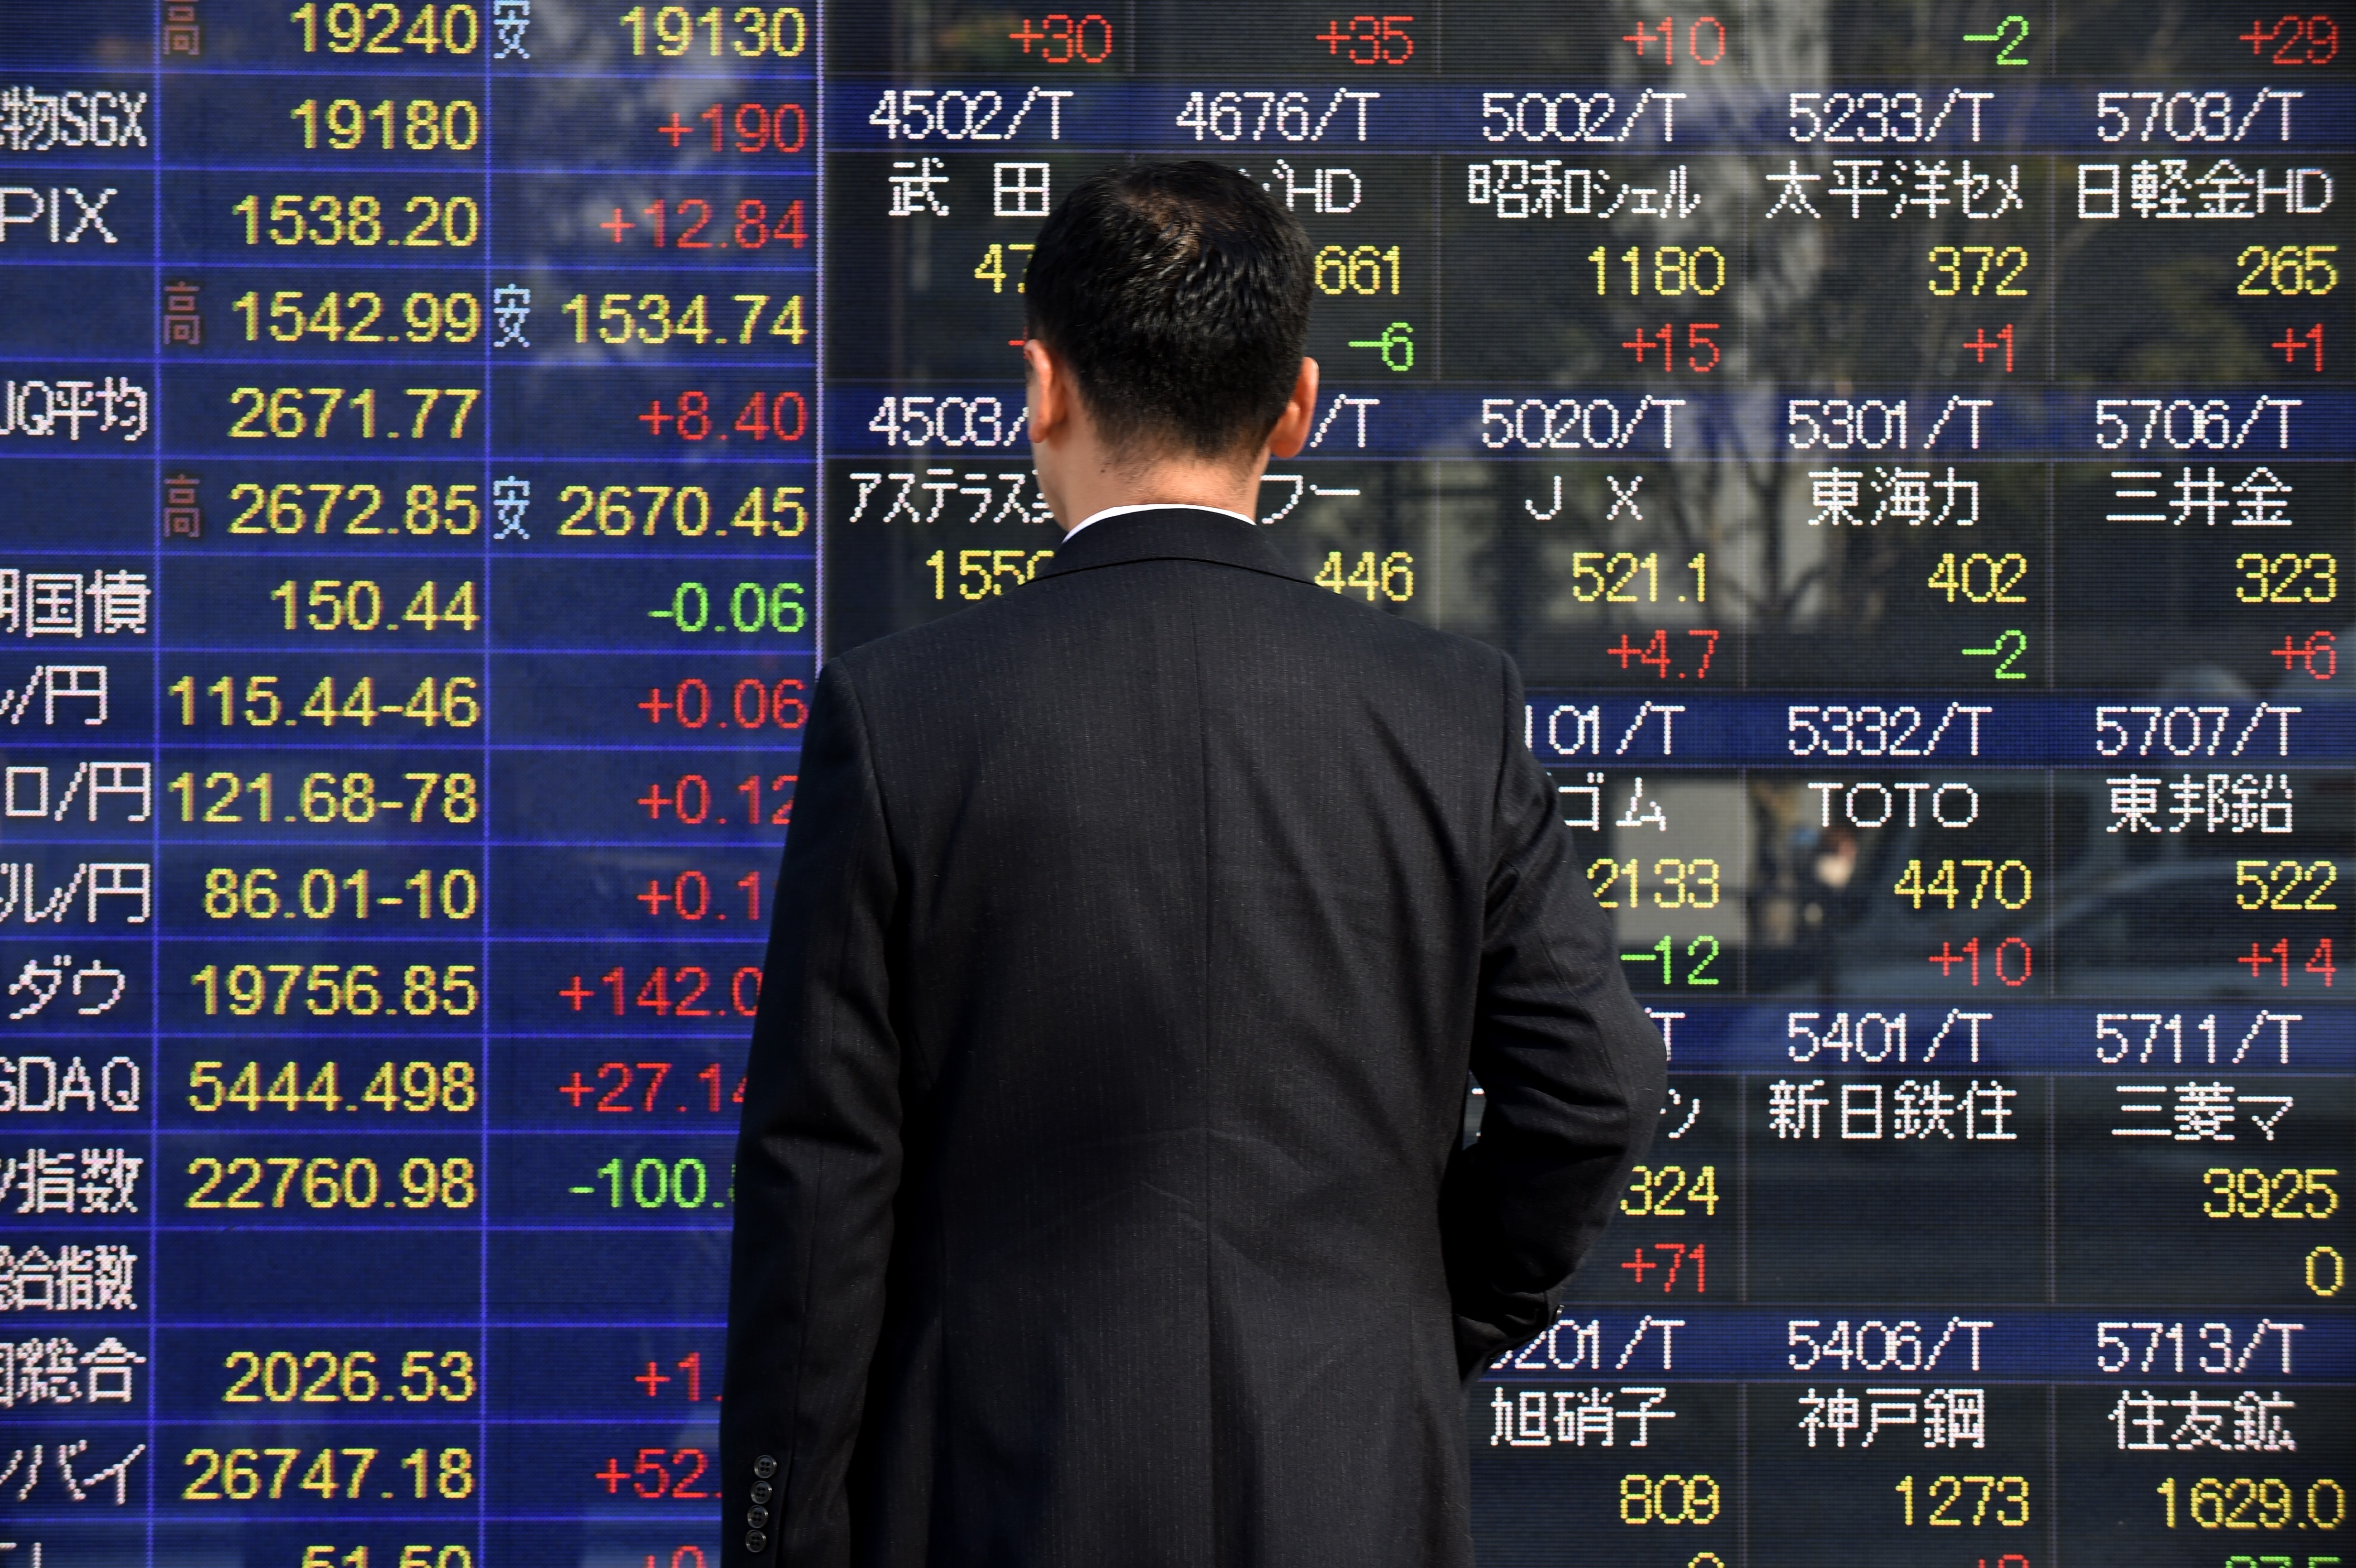 A pedestrian looks at an electronics stock indicator displaying the morning session of the Tokyo Stock Exchange in Tokyo on December 12, 2016. Tokyo stocks opened higher on December 12 led by exporters as the dollar jumped against the yen ahead of an expected US interest rate hike. / AFP PHOTO / Kazuhiro NOGI